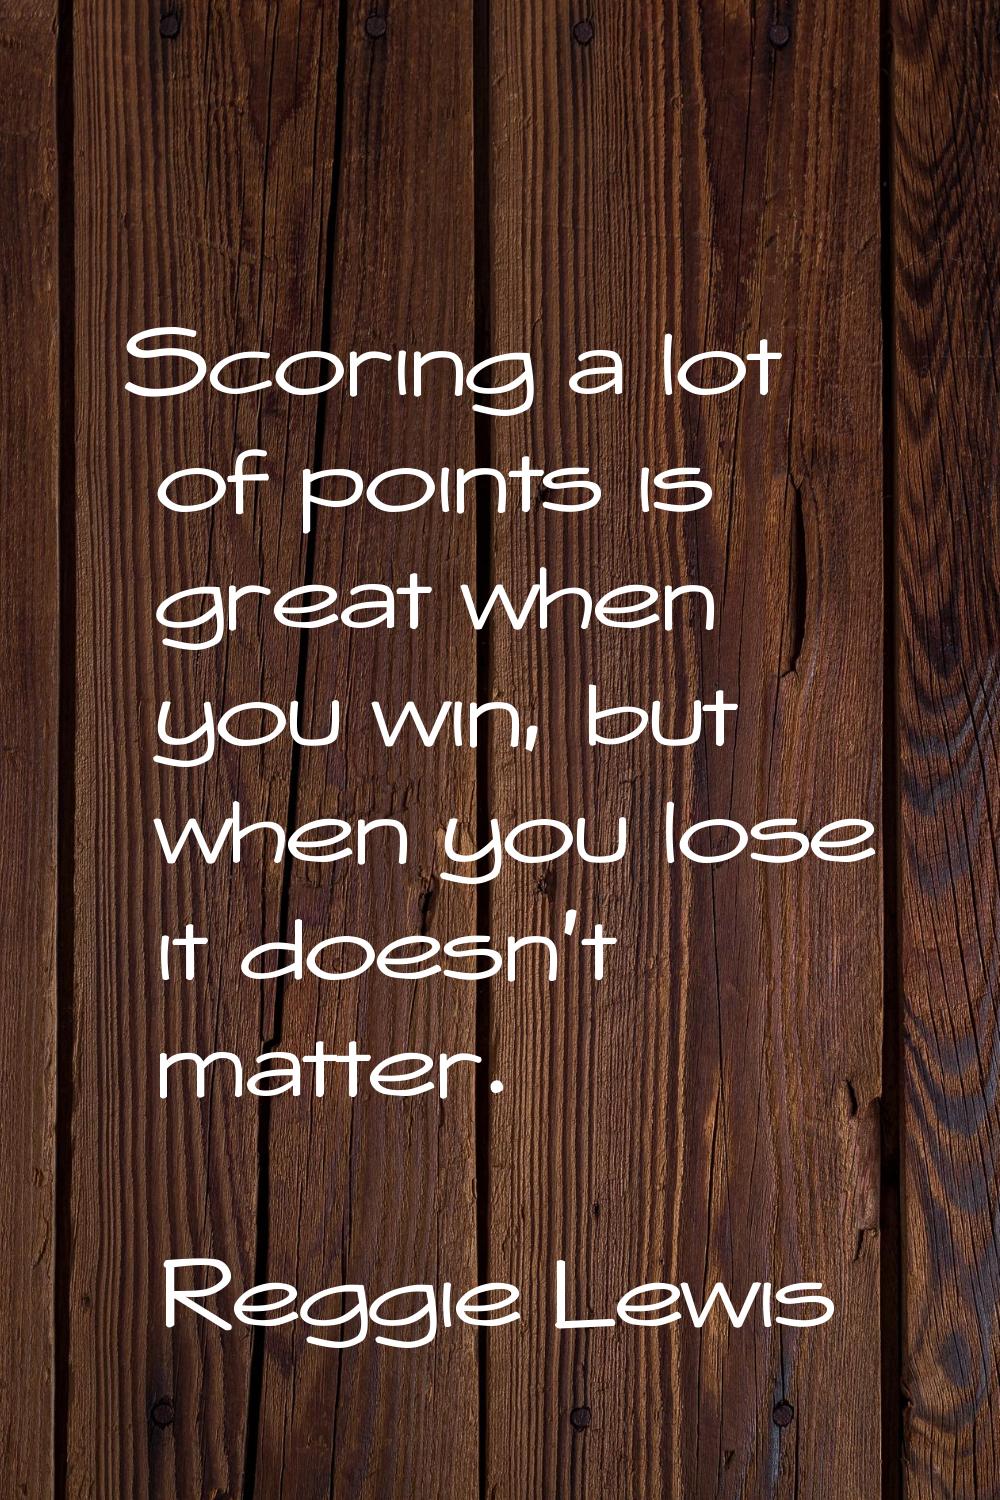 Scoring a lot of points is great when you win, but when you lose it doesn't matter.